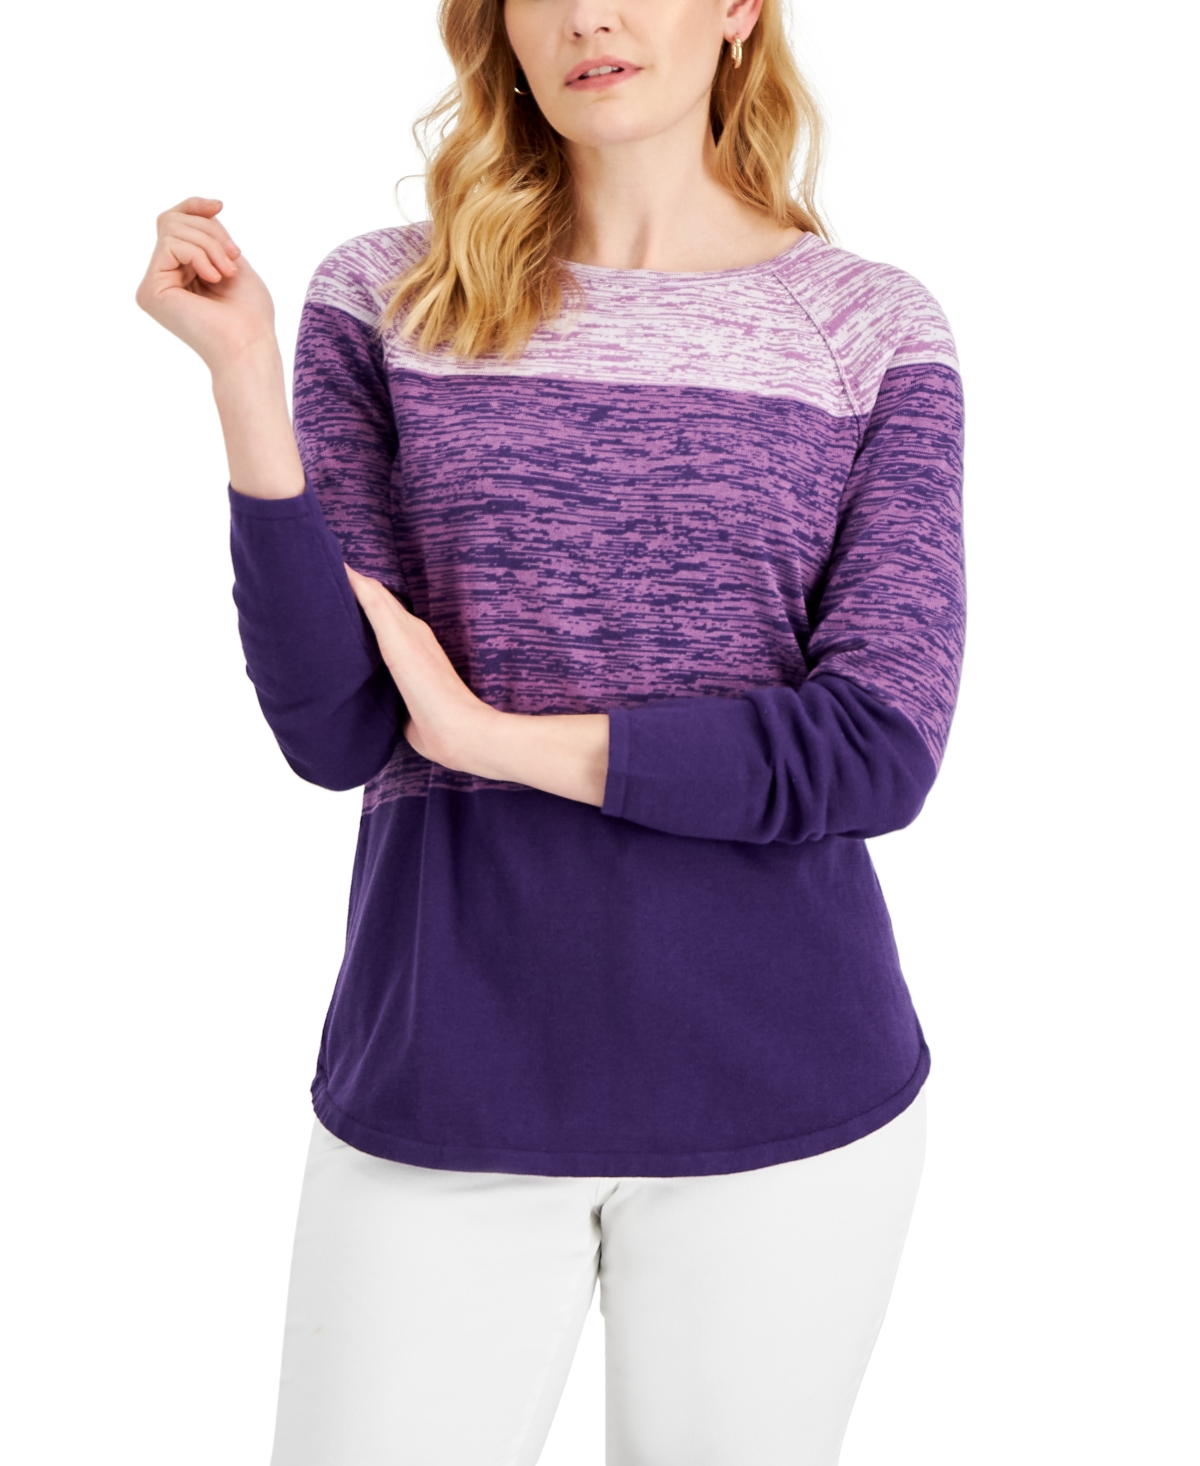 Women's Cotton Colorblocked Sweater, Created for Macy's - Cassis Combo